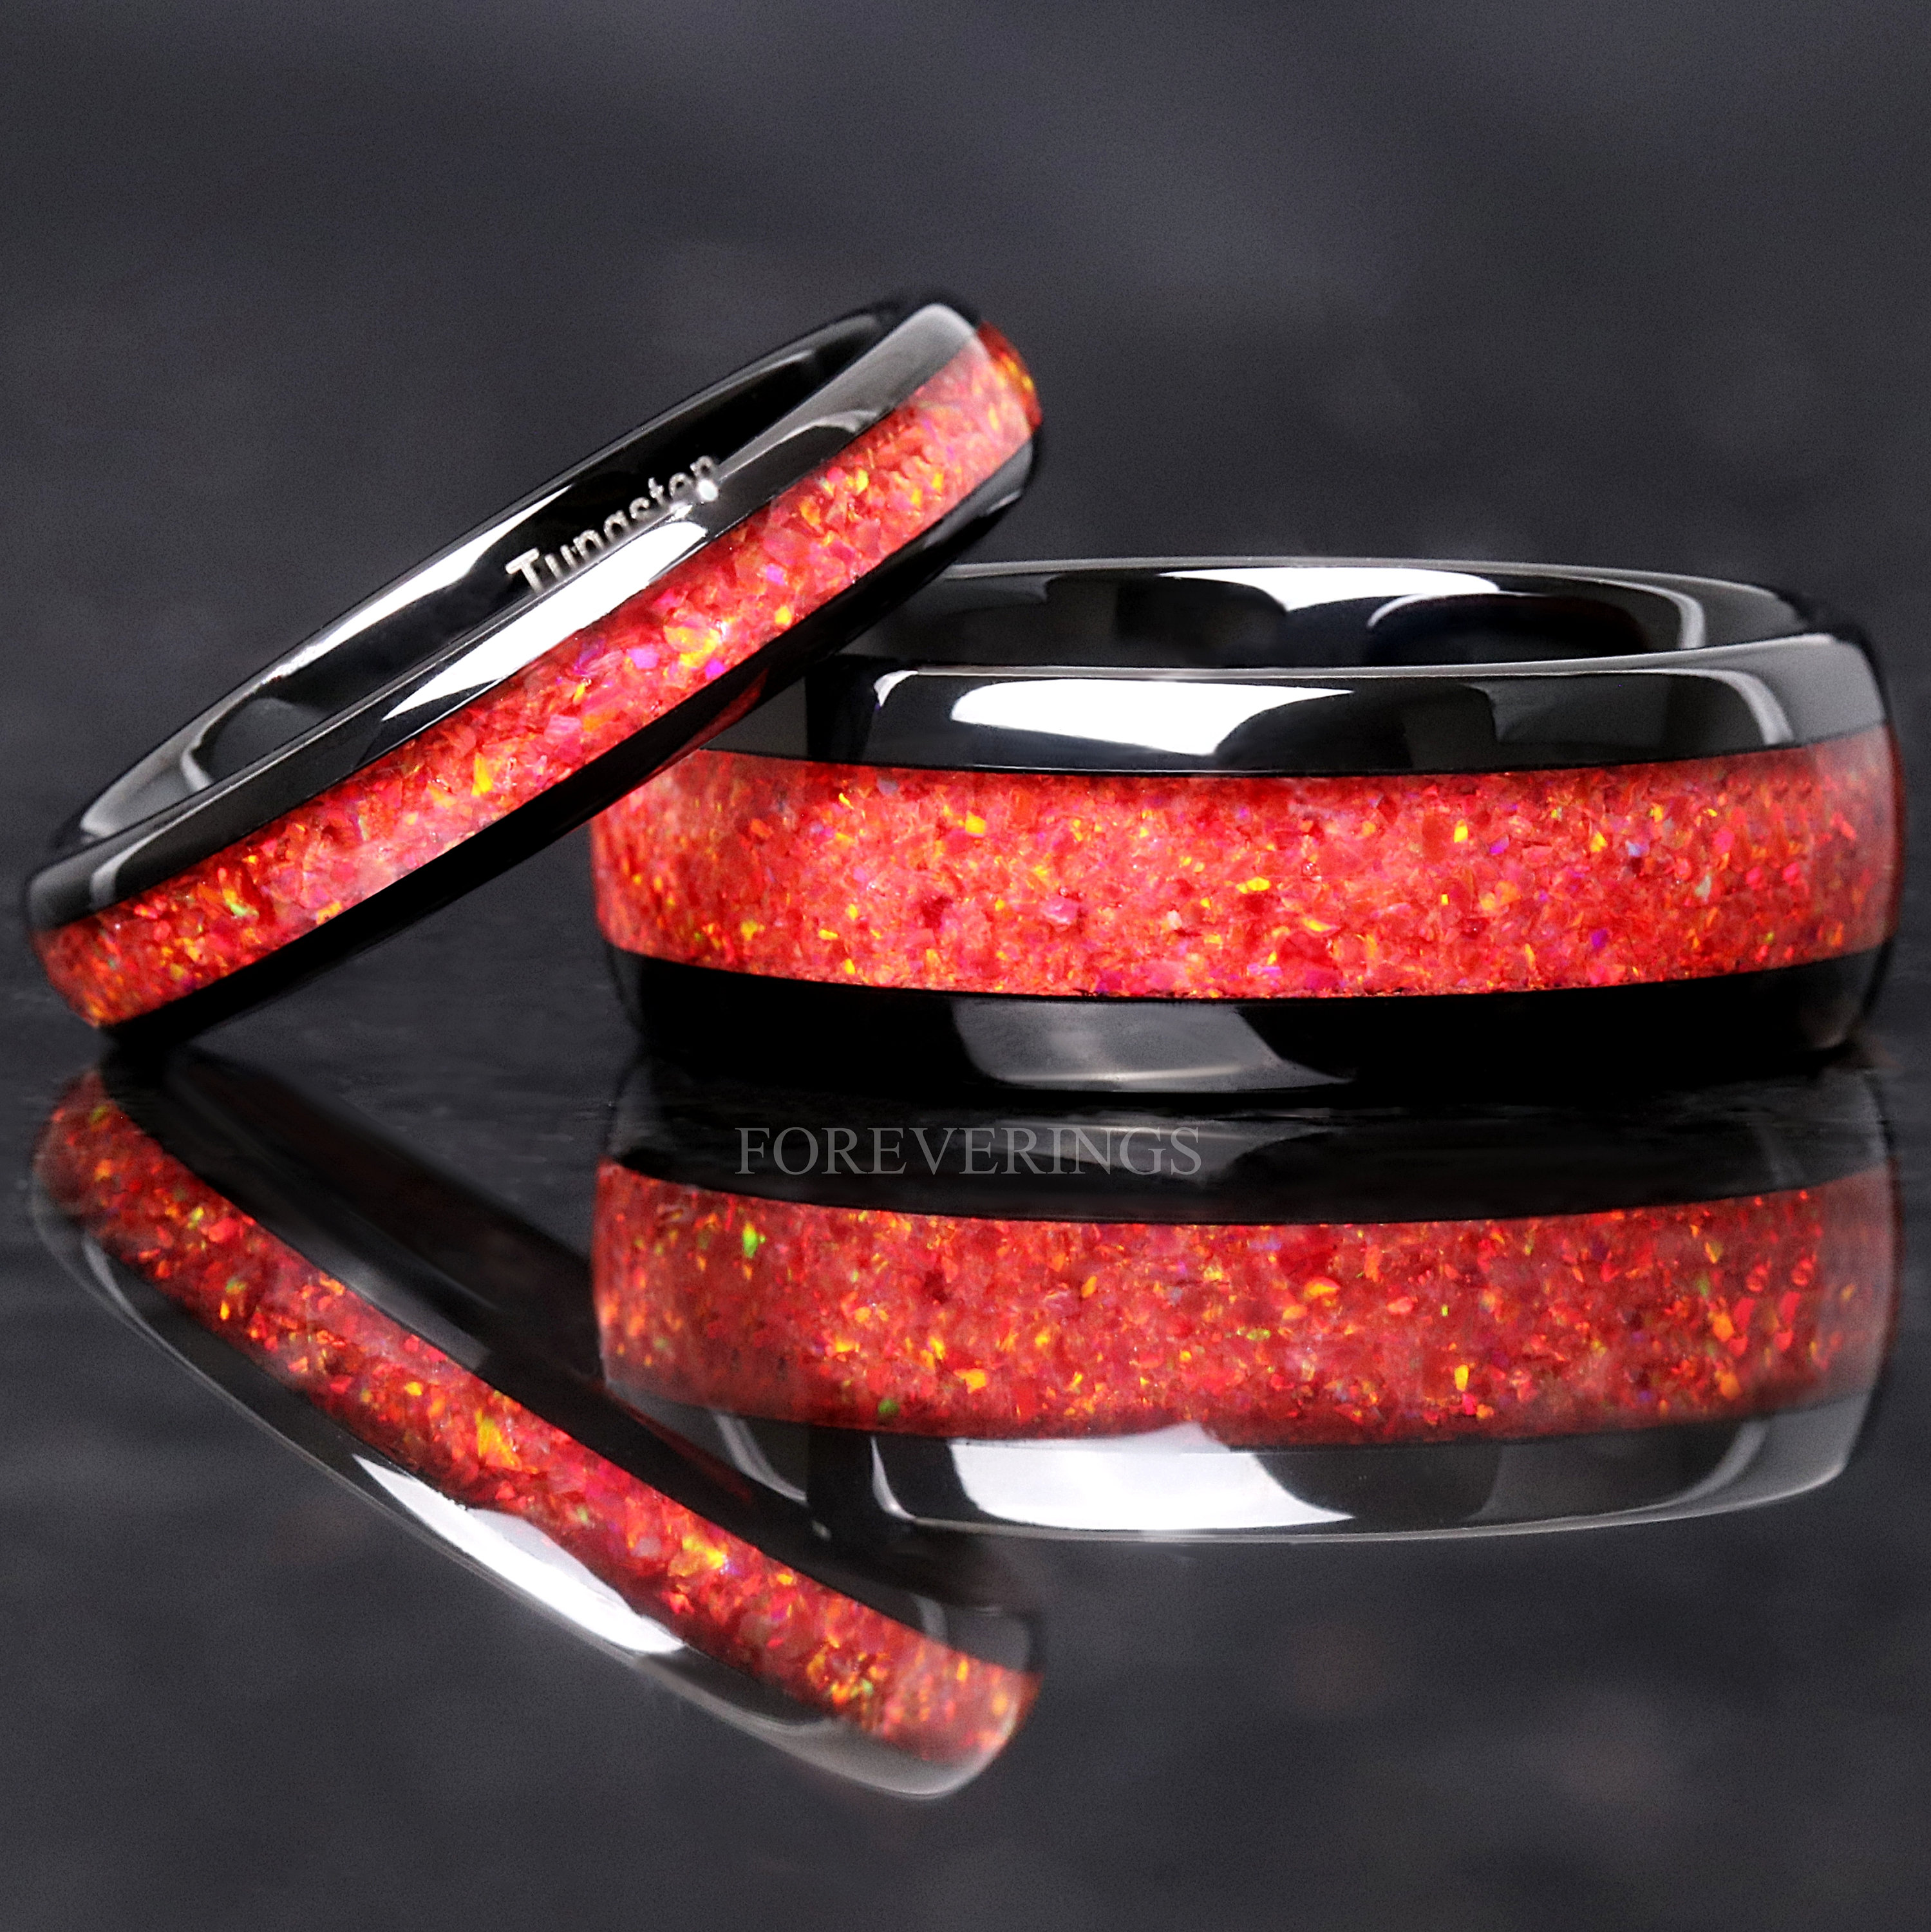 His & Hers Wedding Ring Set- Black Ceramic Ring Set with Red Fire Opal & Glowstone Inlay - 8mm & 6mm Rings - Sizes 5-13 - Orth Custom Rings